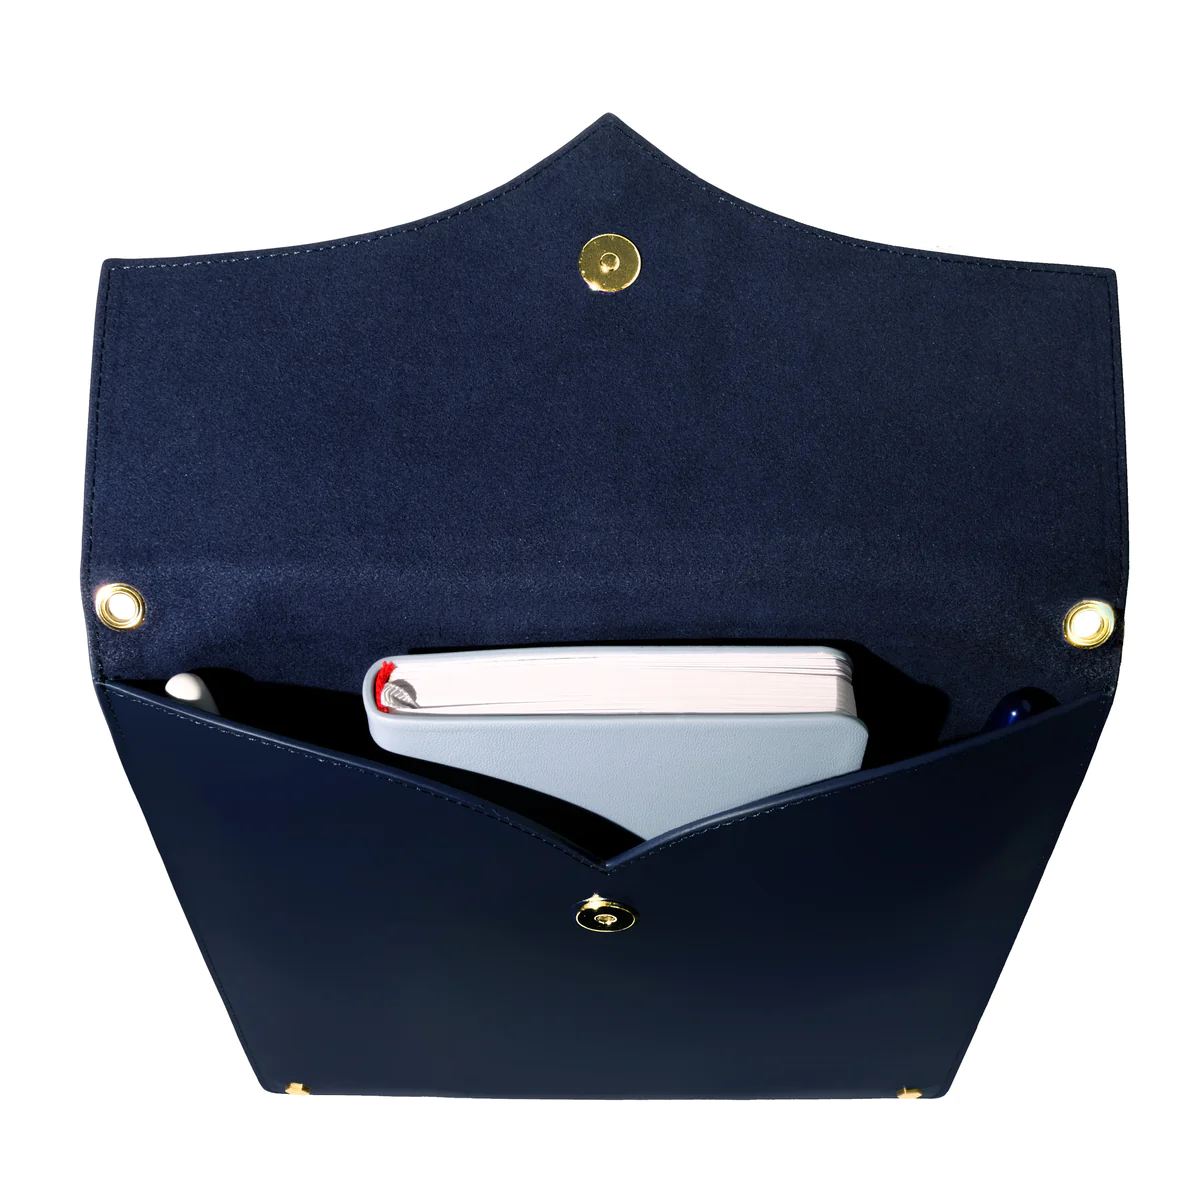 Leather stationary collection - The pendant Folio A5 / Navy